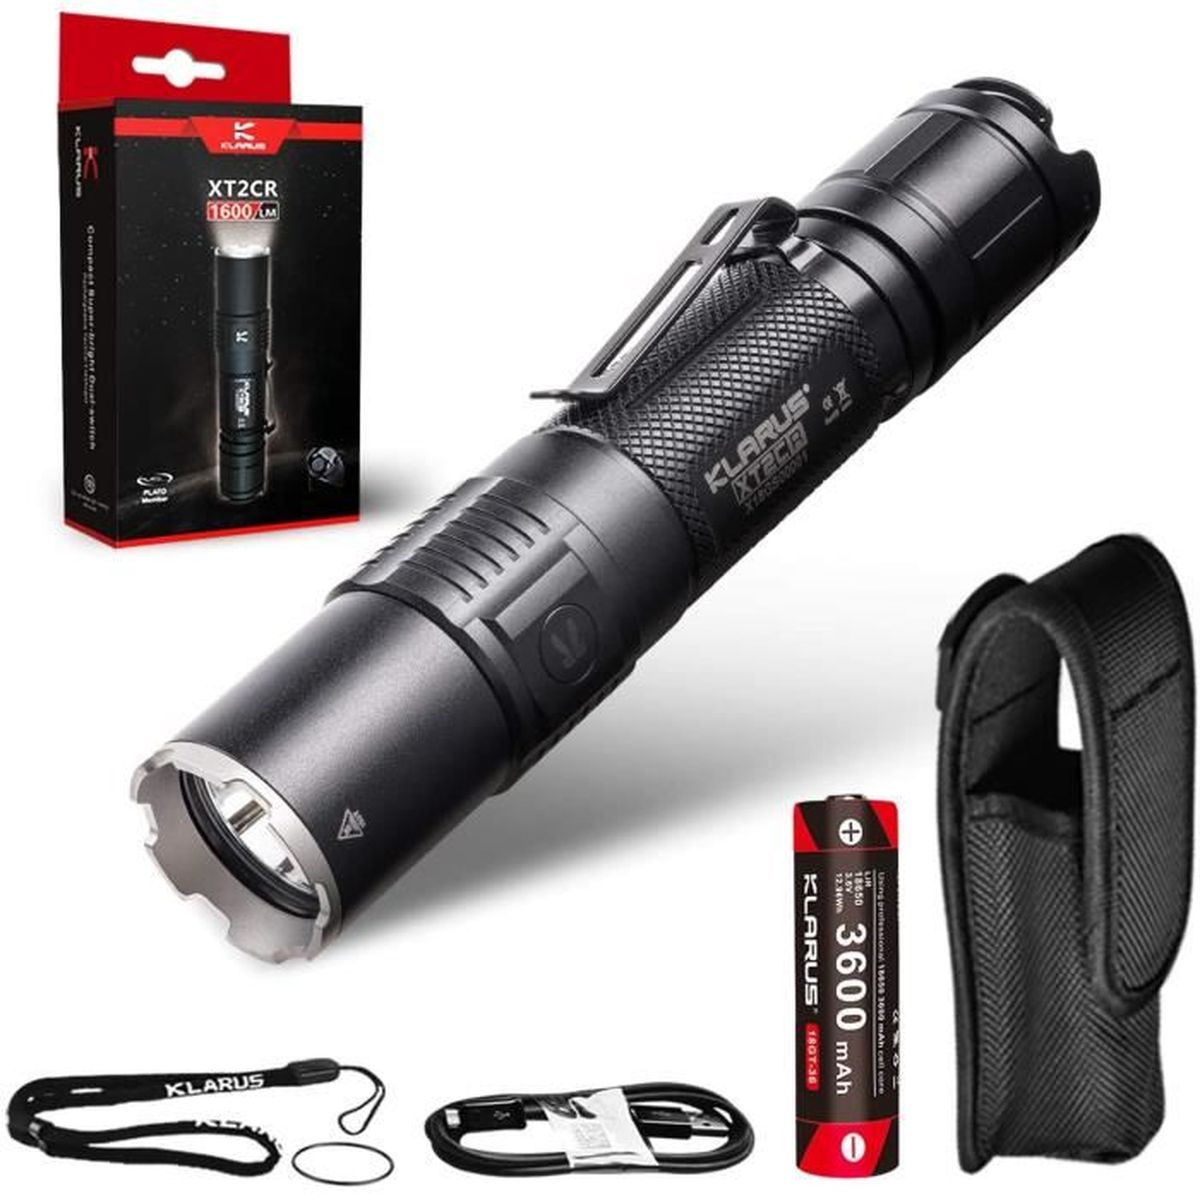 LAMPE TACTIQUE RECHARGEABLE XT2CR LED 1600 LUMENS ECLAIRAGE OUTDOOR CAMPING 